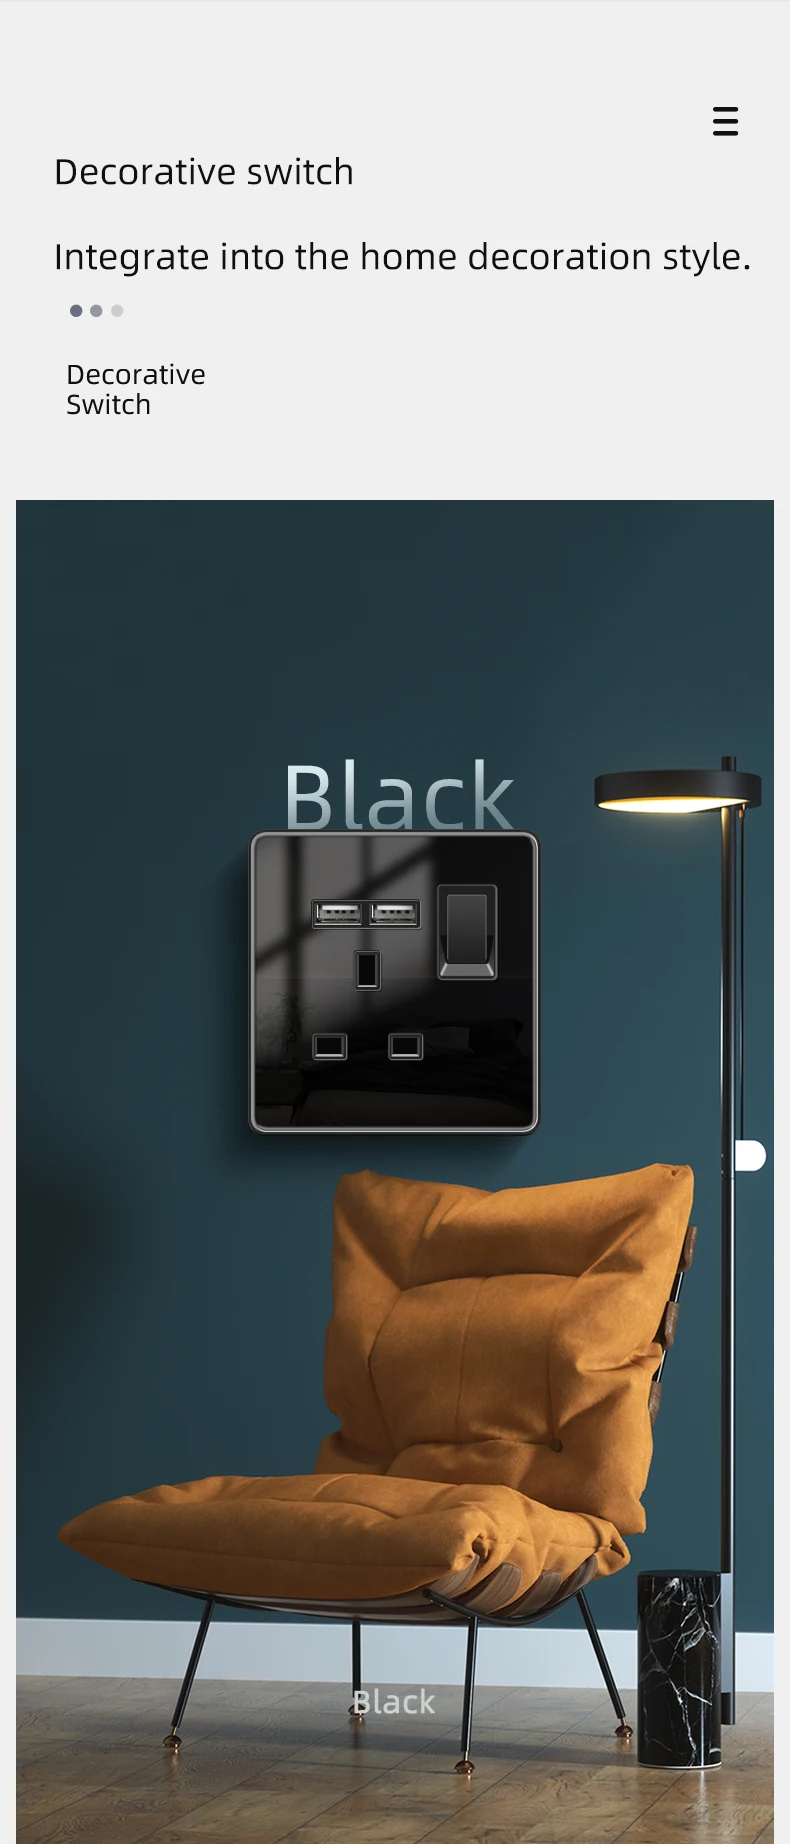 Glass Button Wall Light Switch 1-4 Gang LED Indicator UK 13A 3 Pin Wall Socket Electric Outlet Frame-less Tempered Glass Panel